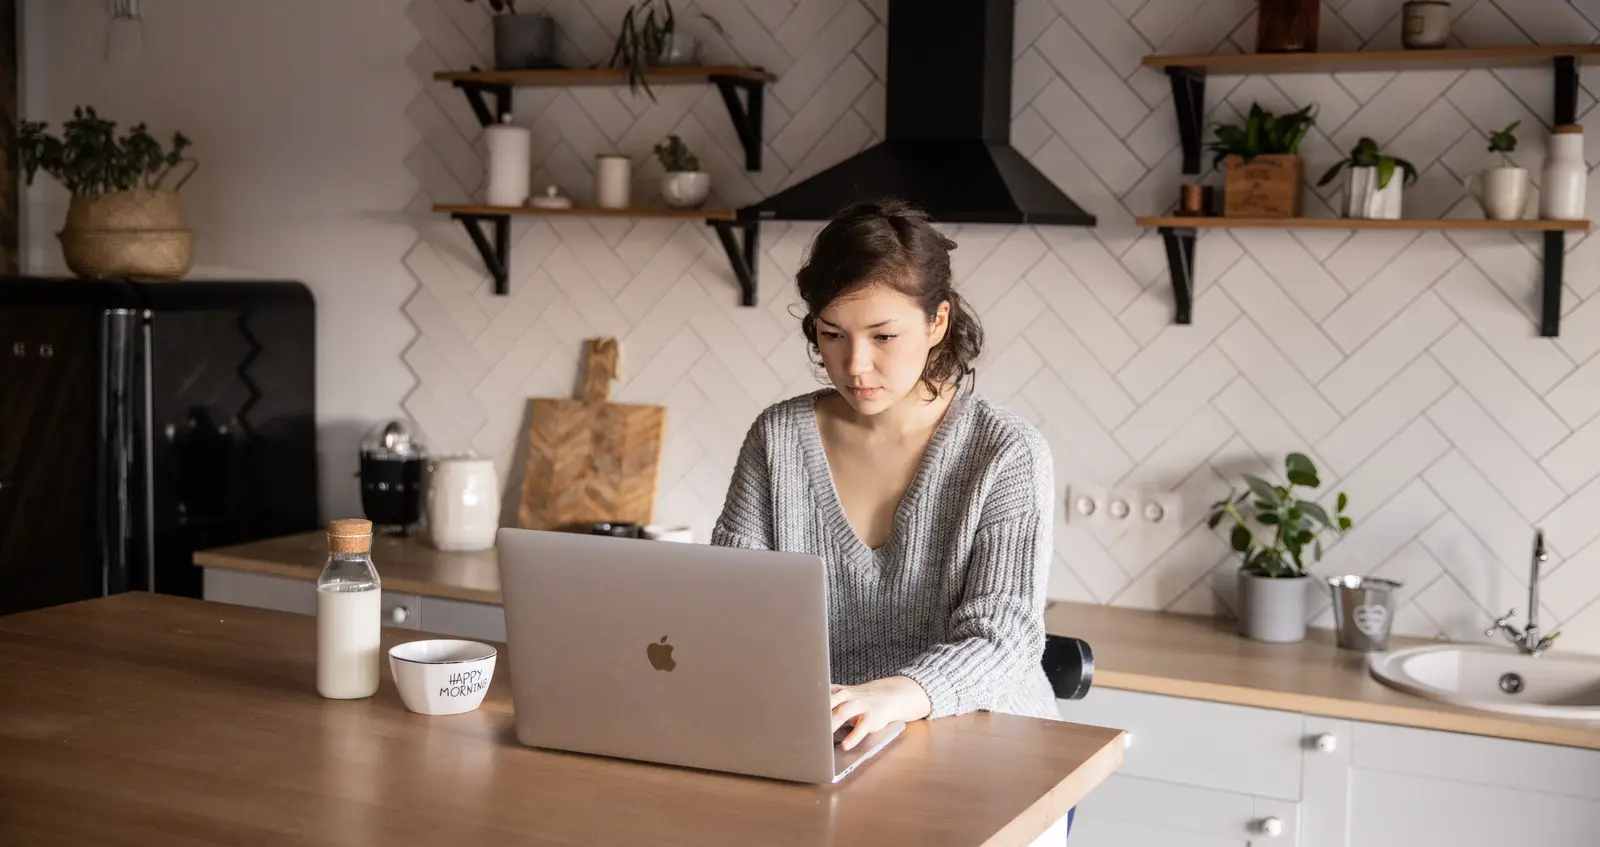 Woman on laptop in kitchen